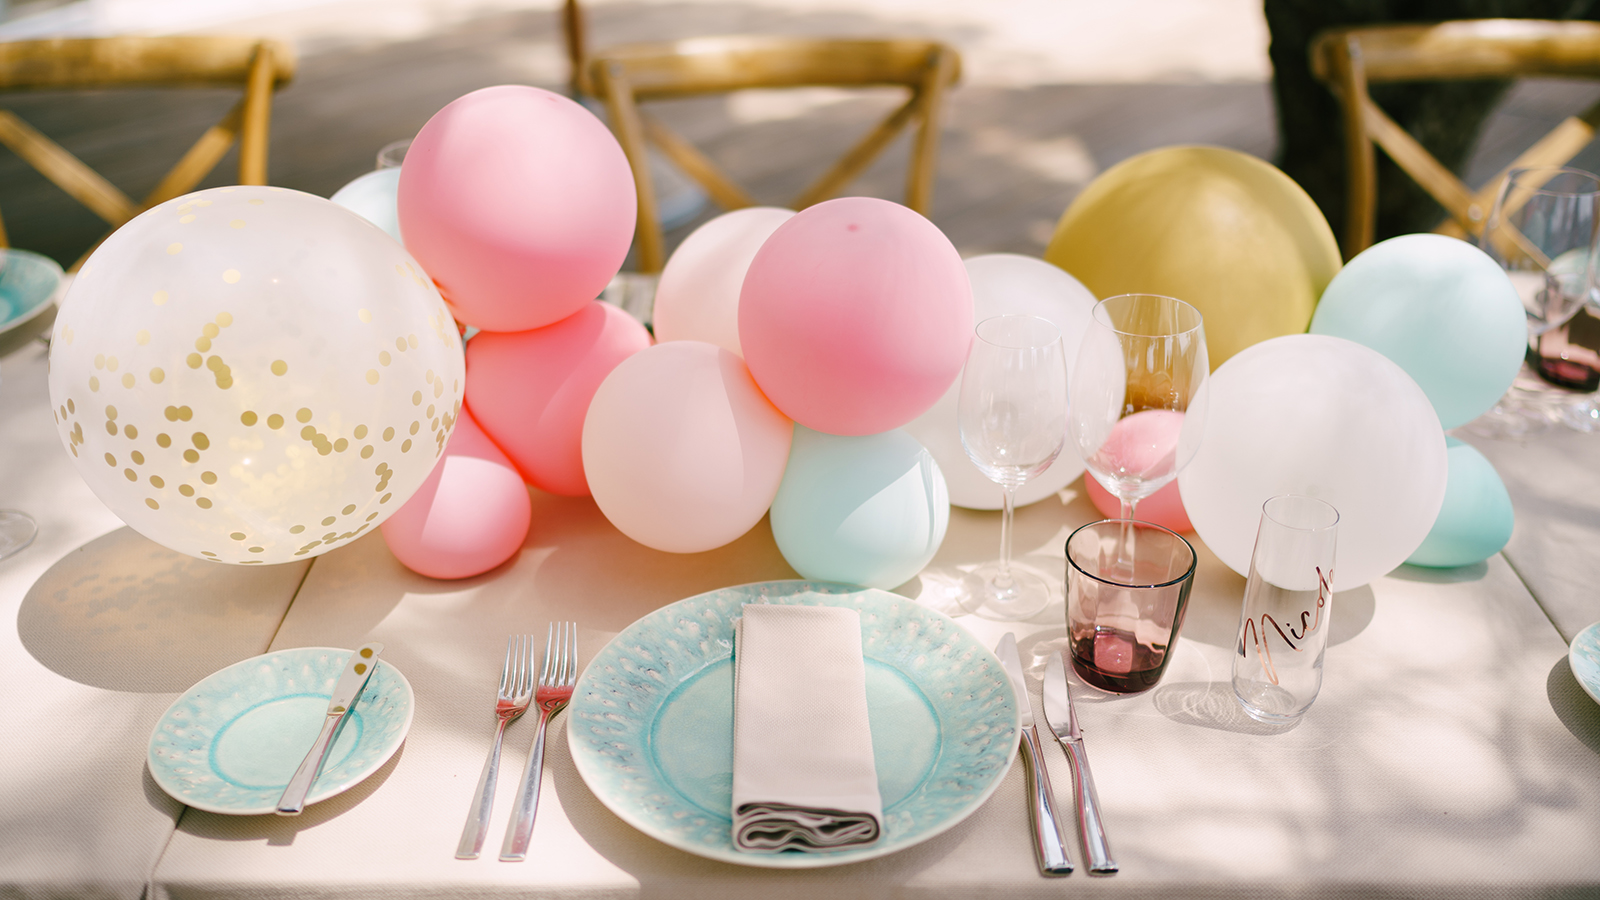 Wedding dinner table reception. Blue plates with a pattern and a napkin, on a cream tablecloth. Little balloons on the table. Serving a table for a bachelorette party.